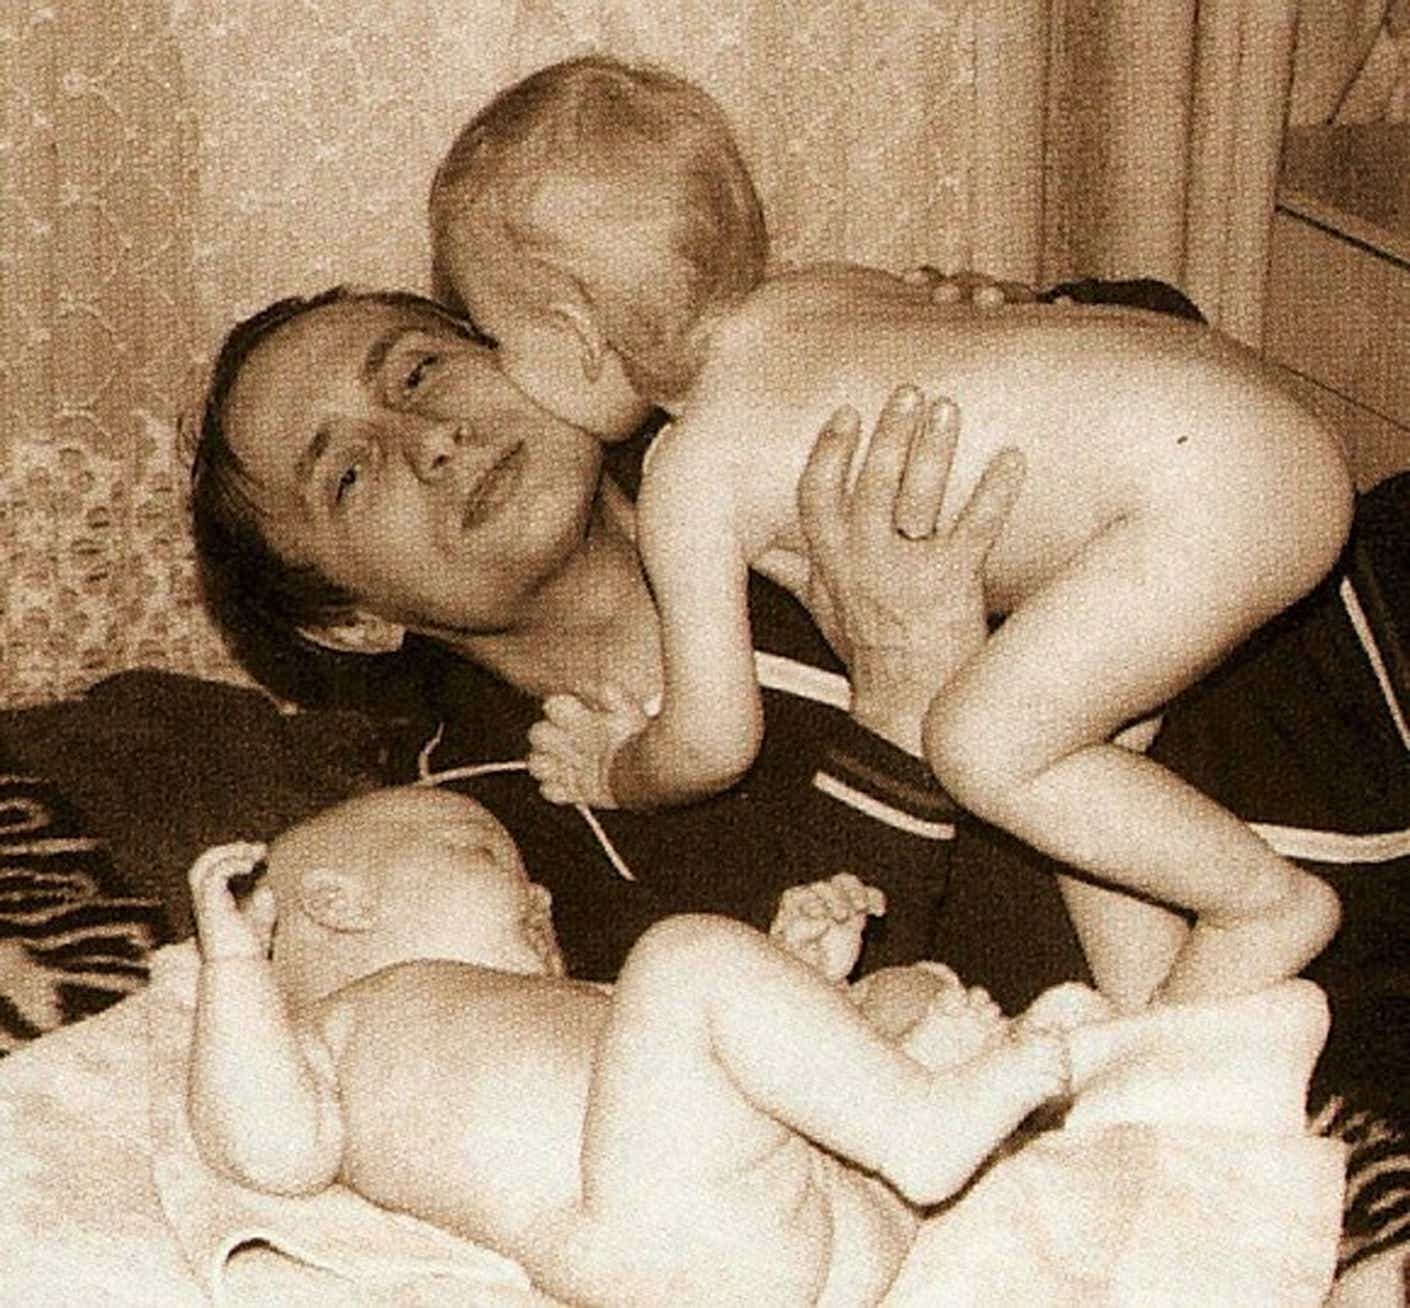 Putin and his young daughters